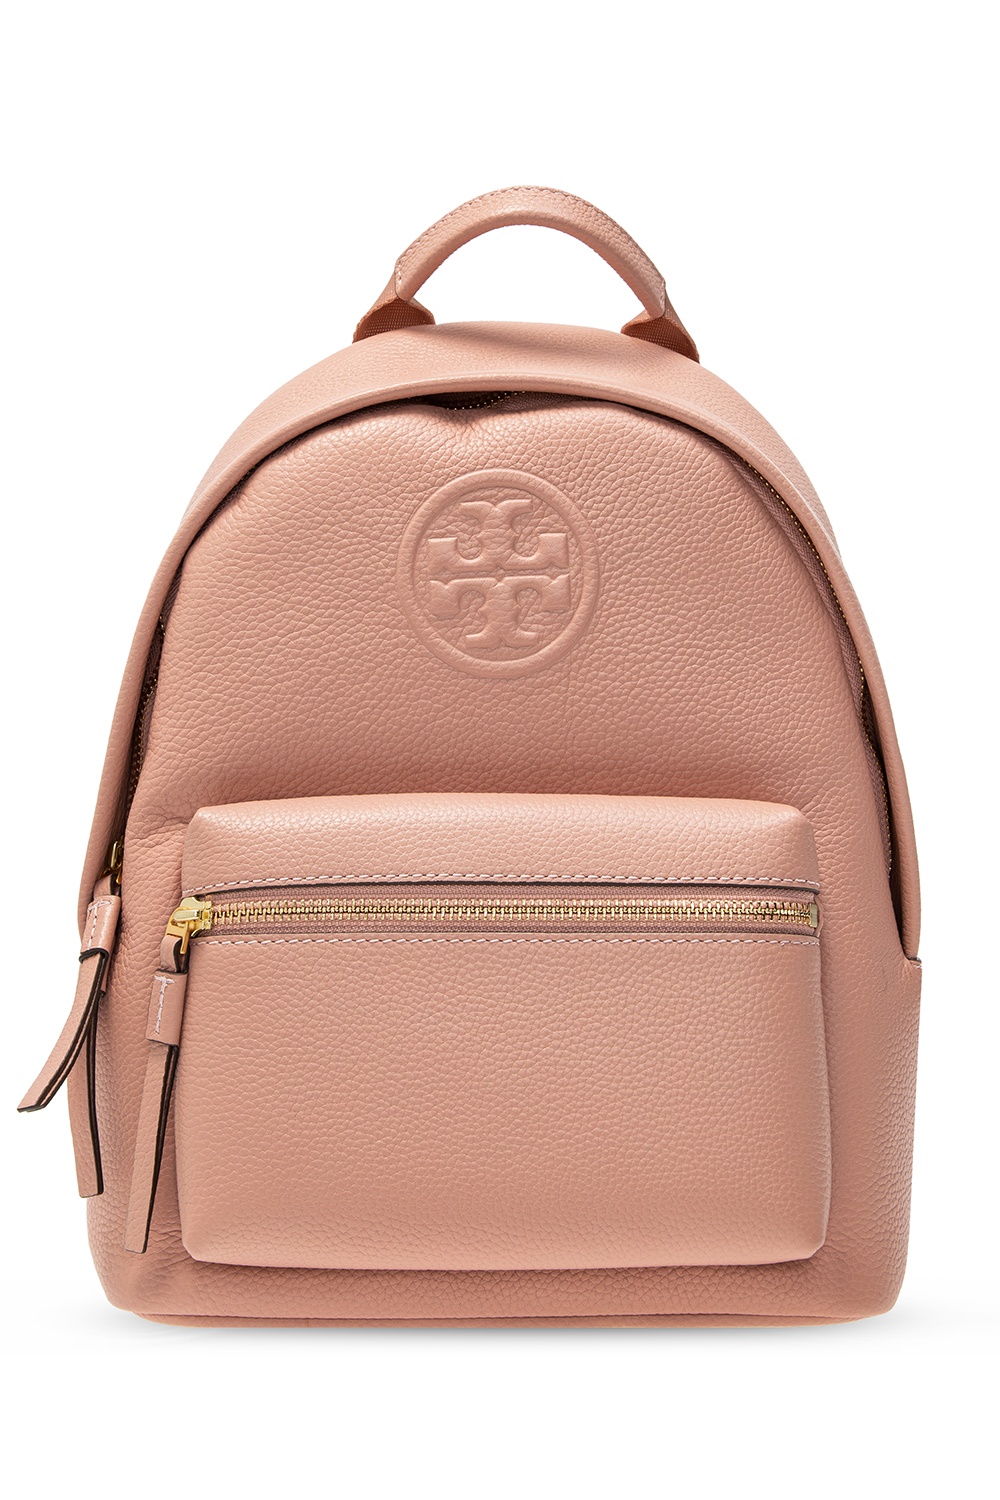 COACH STUDIO BAGUETTE BAG IN PATENT LEATHER | Women's Bags | Tory Burch  'Perry' backpack | IetpShops